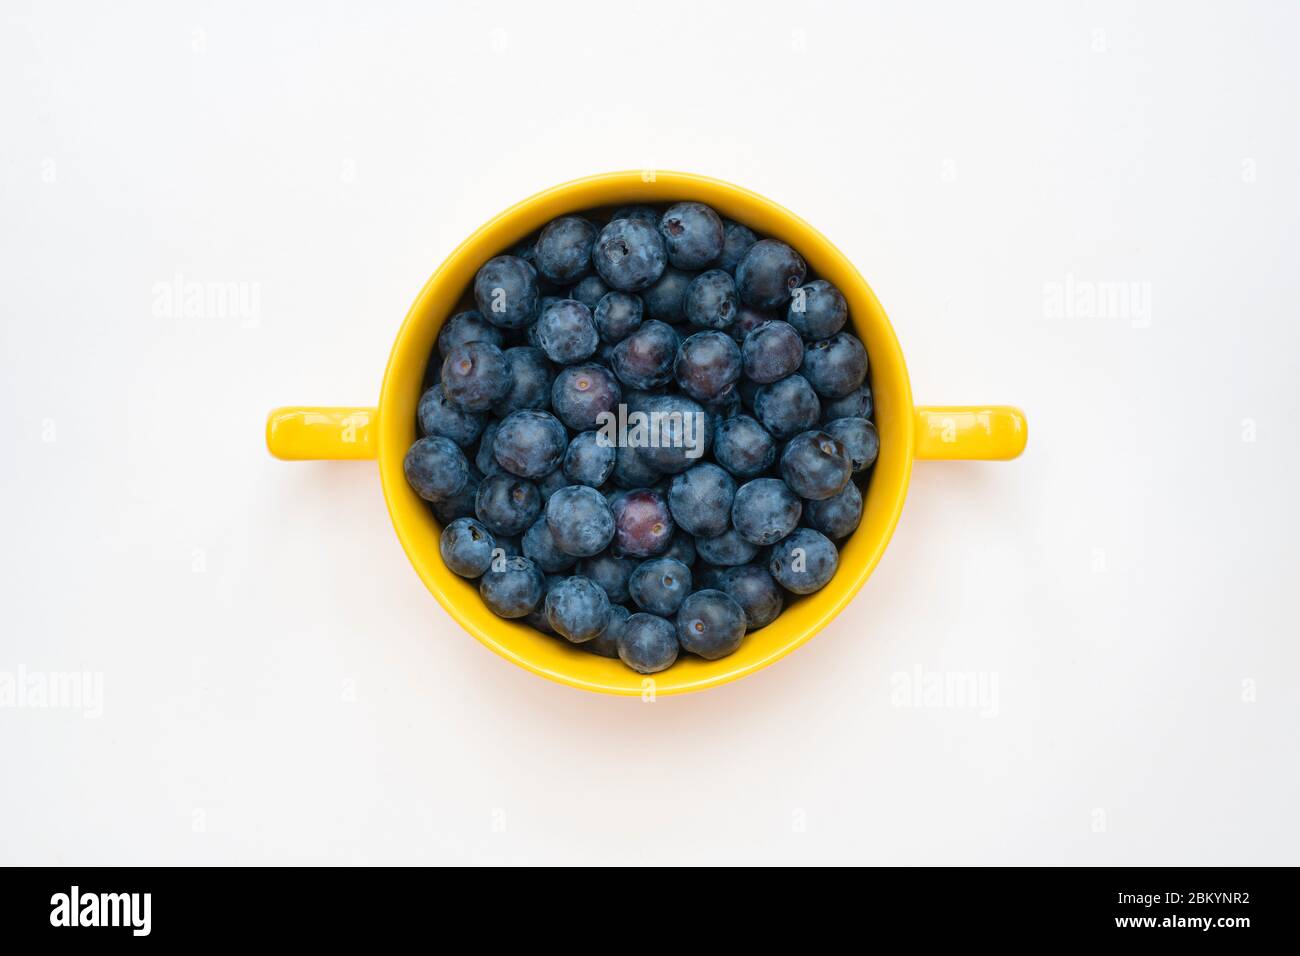 Vaccinium corymbosum. Blueberries in a yellow bowl on a white background Stock Photo